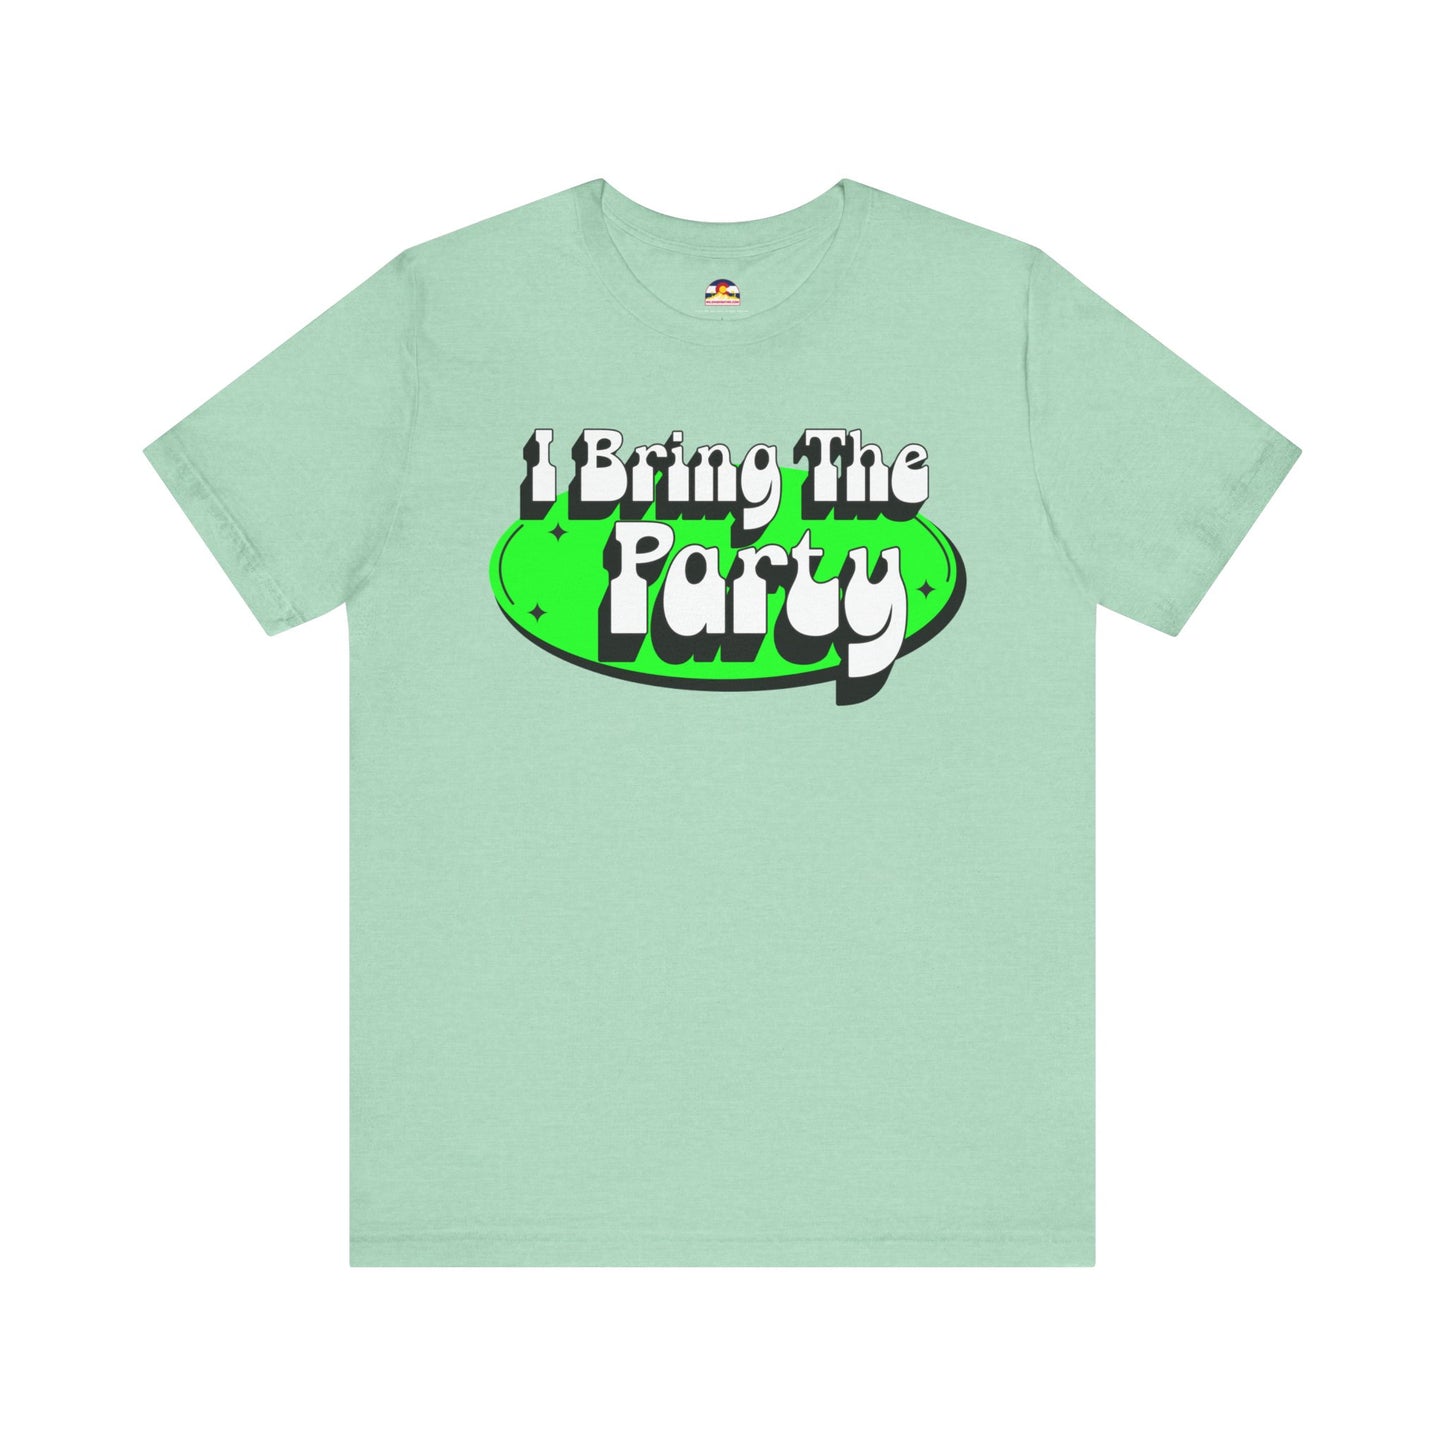 I Bring The Party T-Shirt